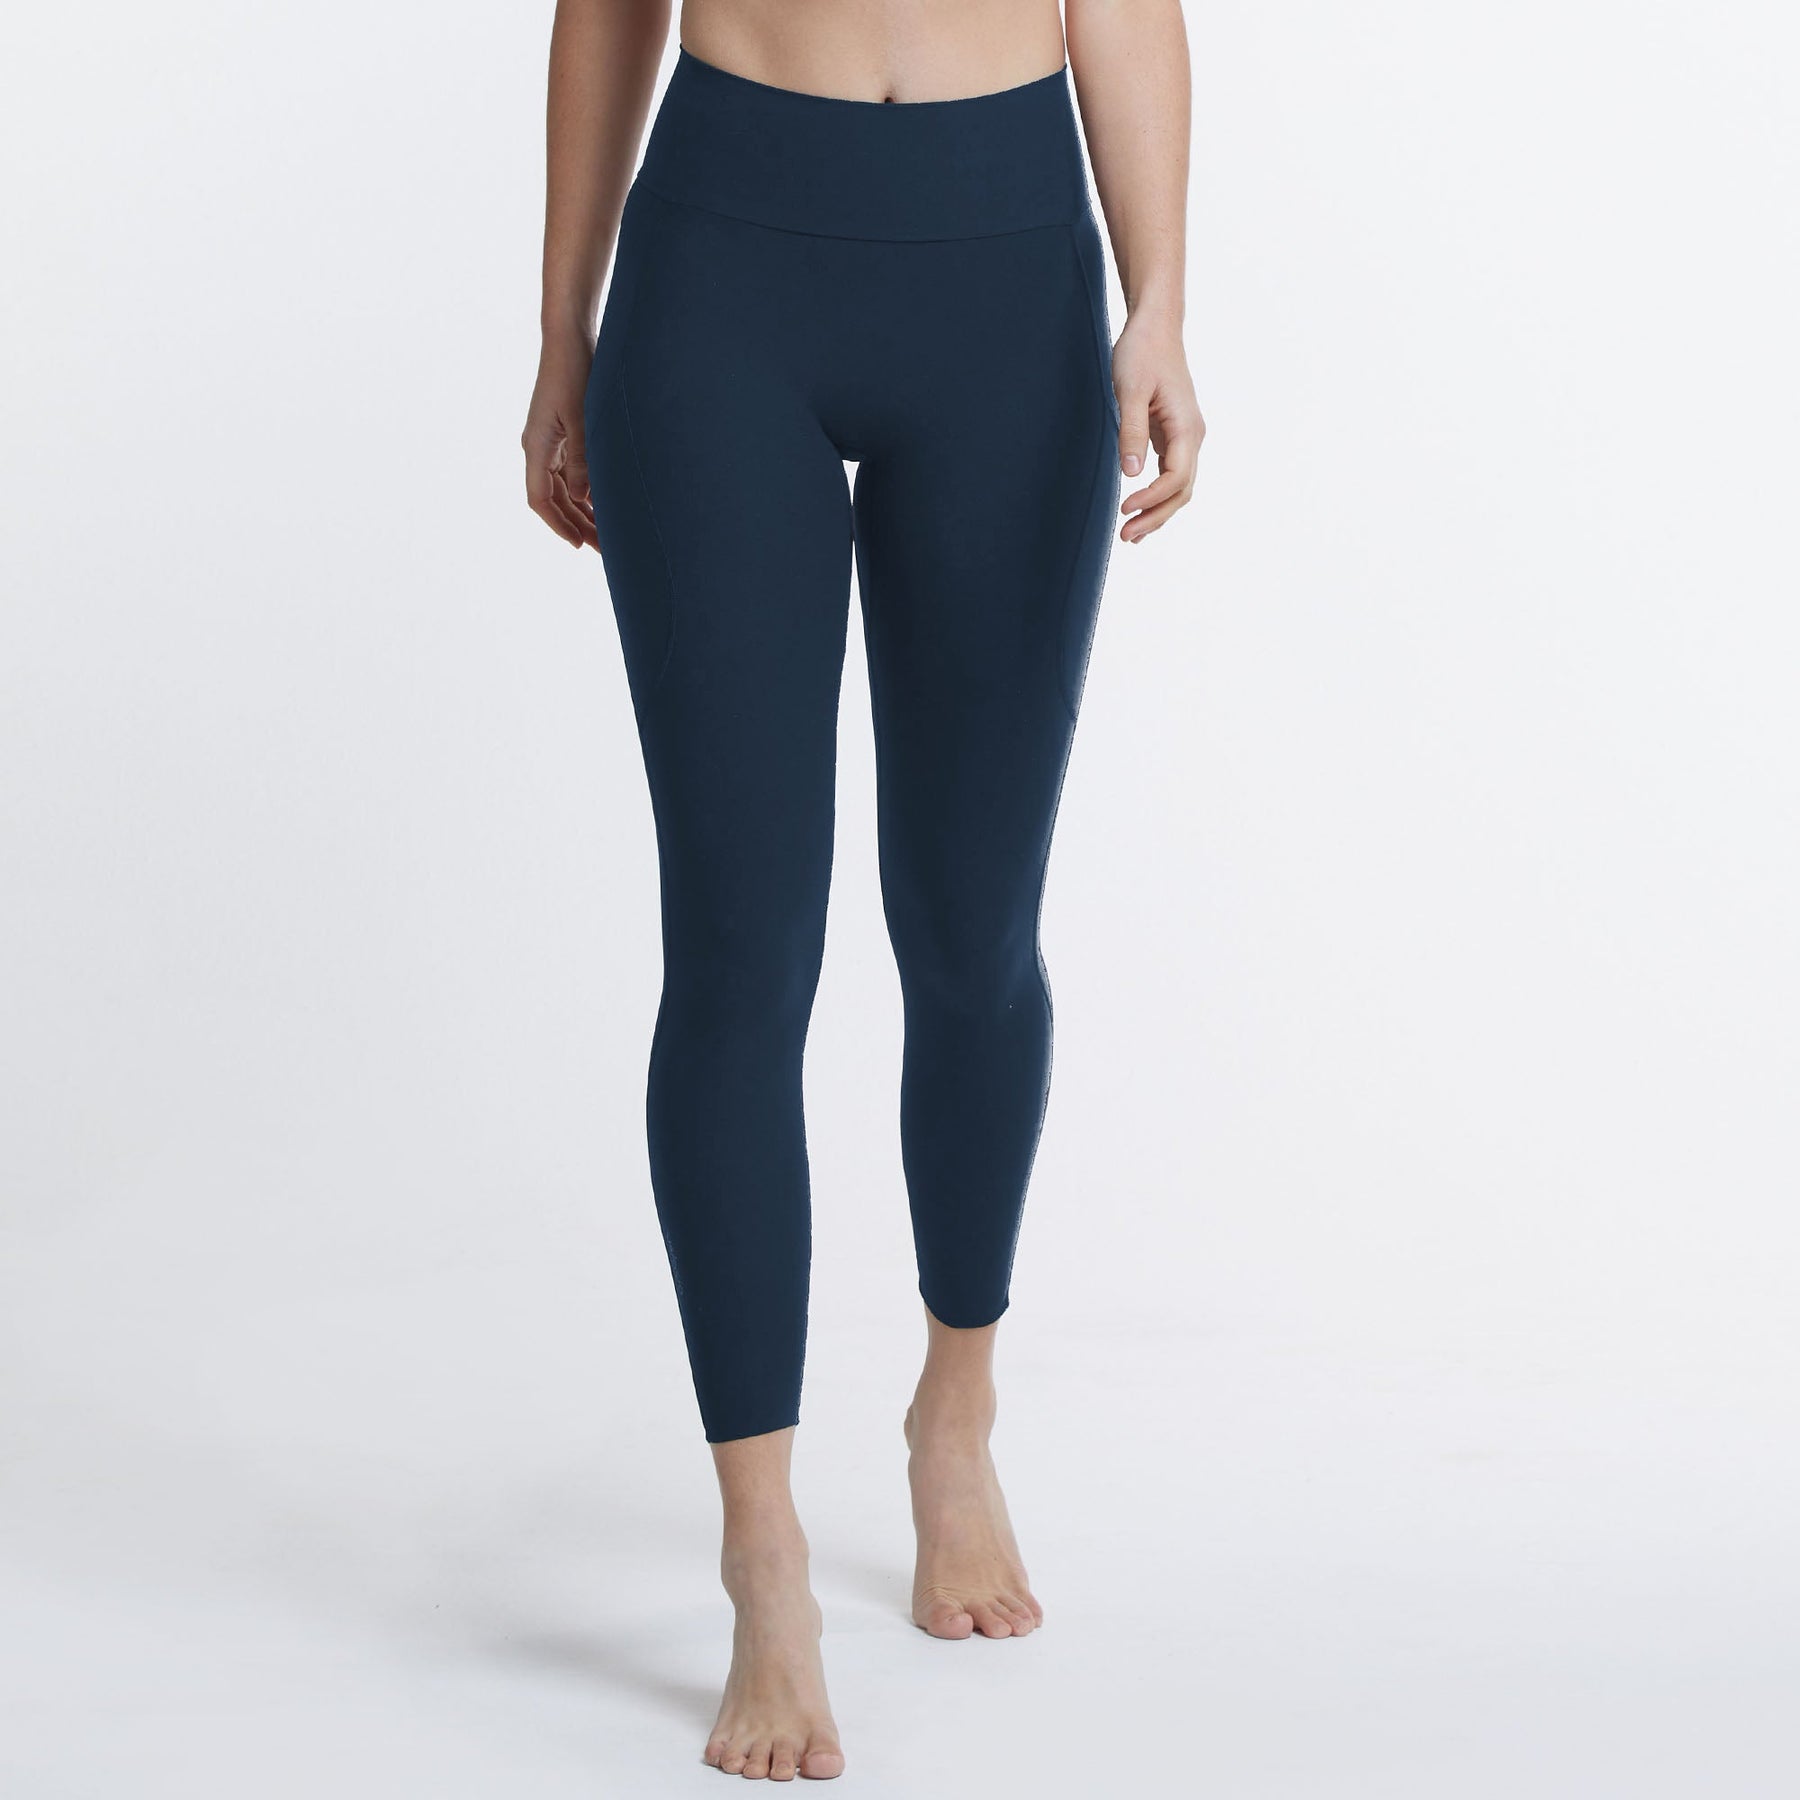 Lululemon Align Joggers Black Size 10 - $58 (50% Off Retail) - From